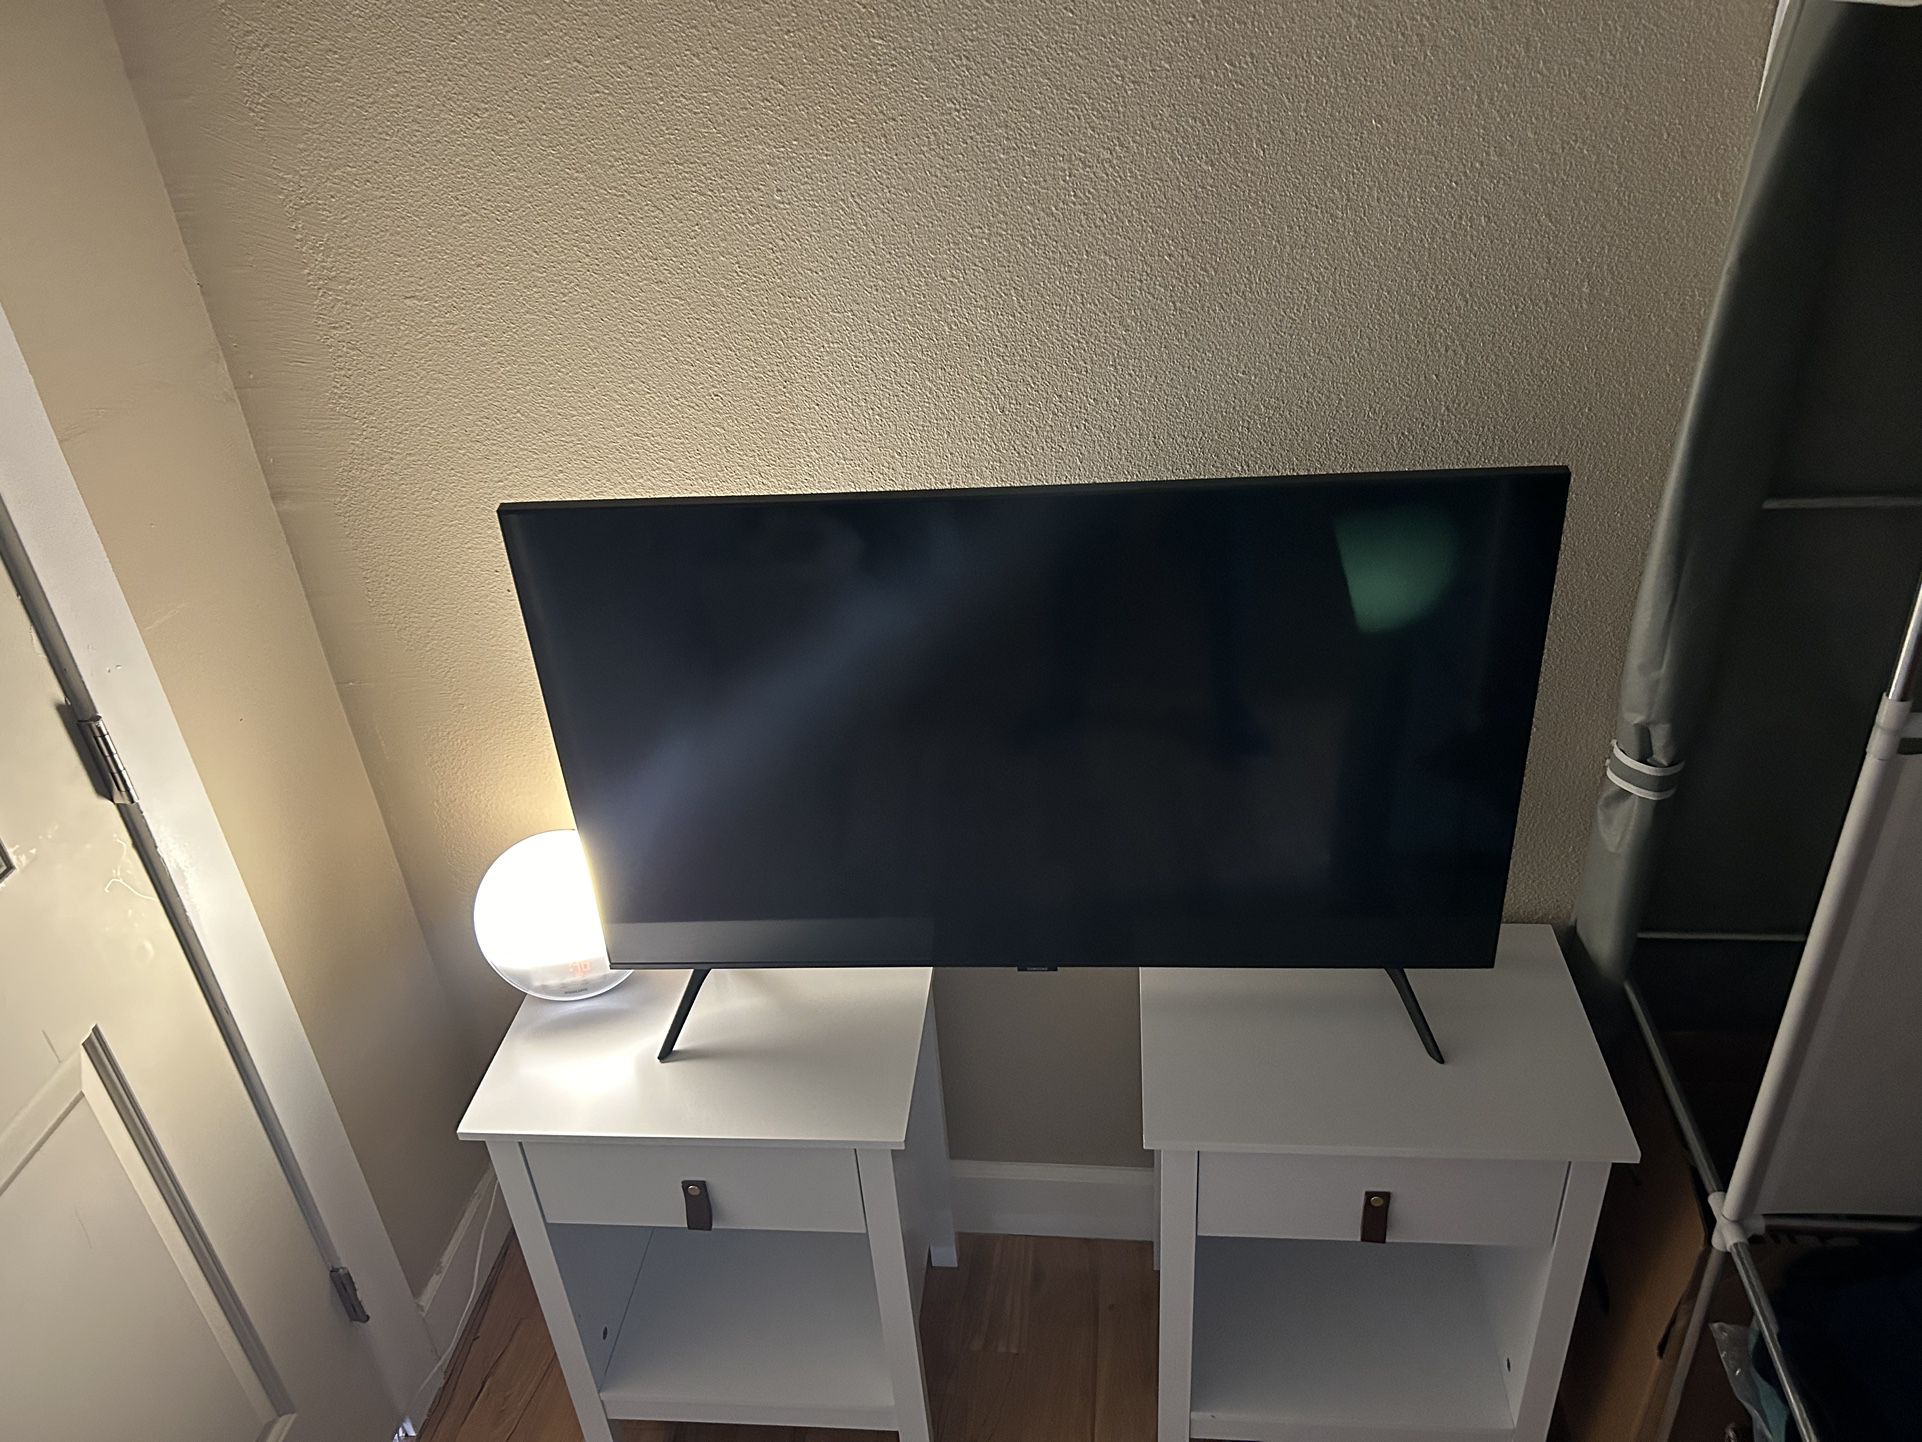 Samsung 4K TV (43”) With HDR 